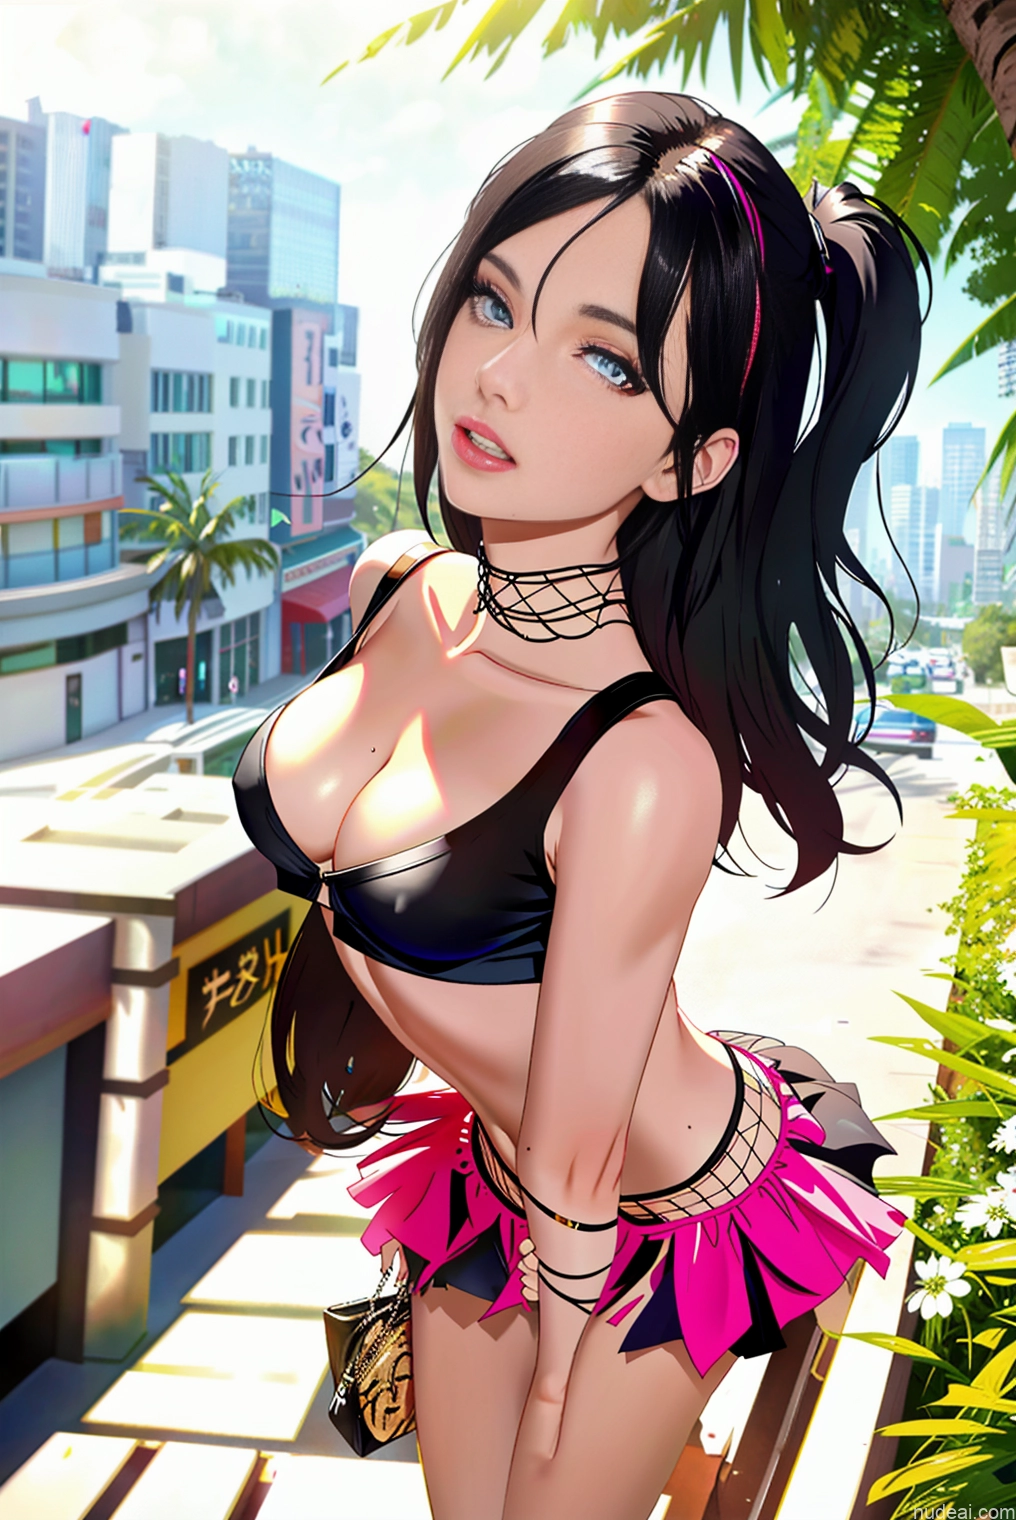 Small Tits Small Ass Skinny 18 Skin Detail (beta) Mall Front View Cheerleader Crop Top Fishnet Micro Skirt Partially Nude Detailed Asian Black Hair Woman Topless Two Bra Pull Down